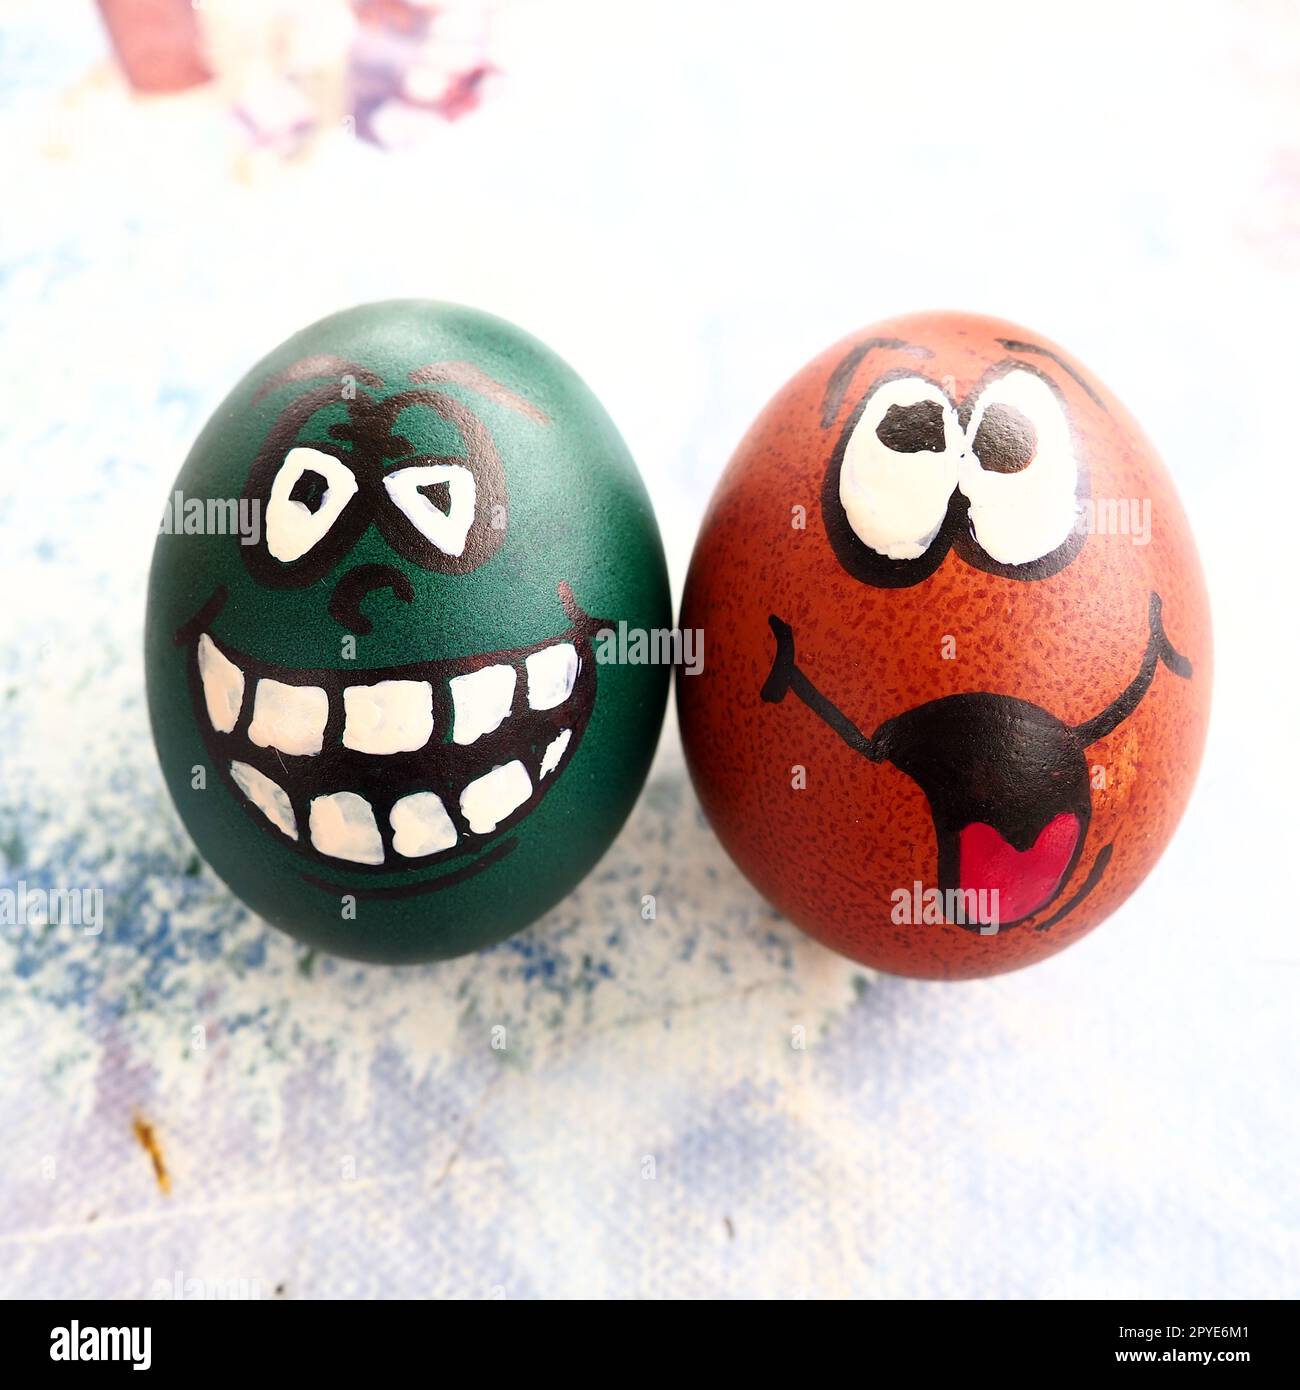 Easter eggs dyed green and brown with painted laughing faces. Funny grimaces with eyes, tongue and big white teeth. Scary face for Halloween. Emoticon for Easter. Light abstract background. Stock Photo